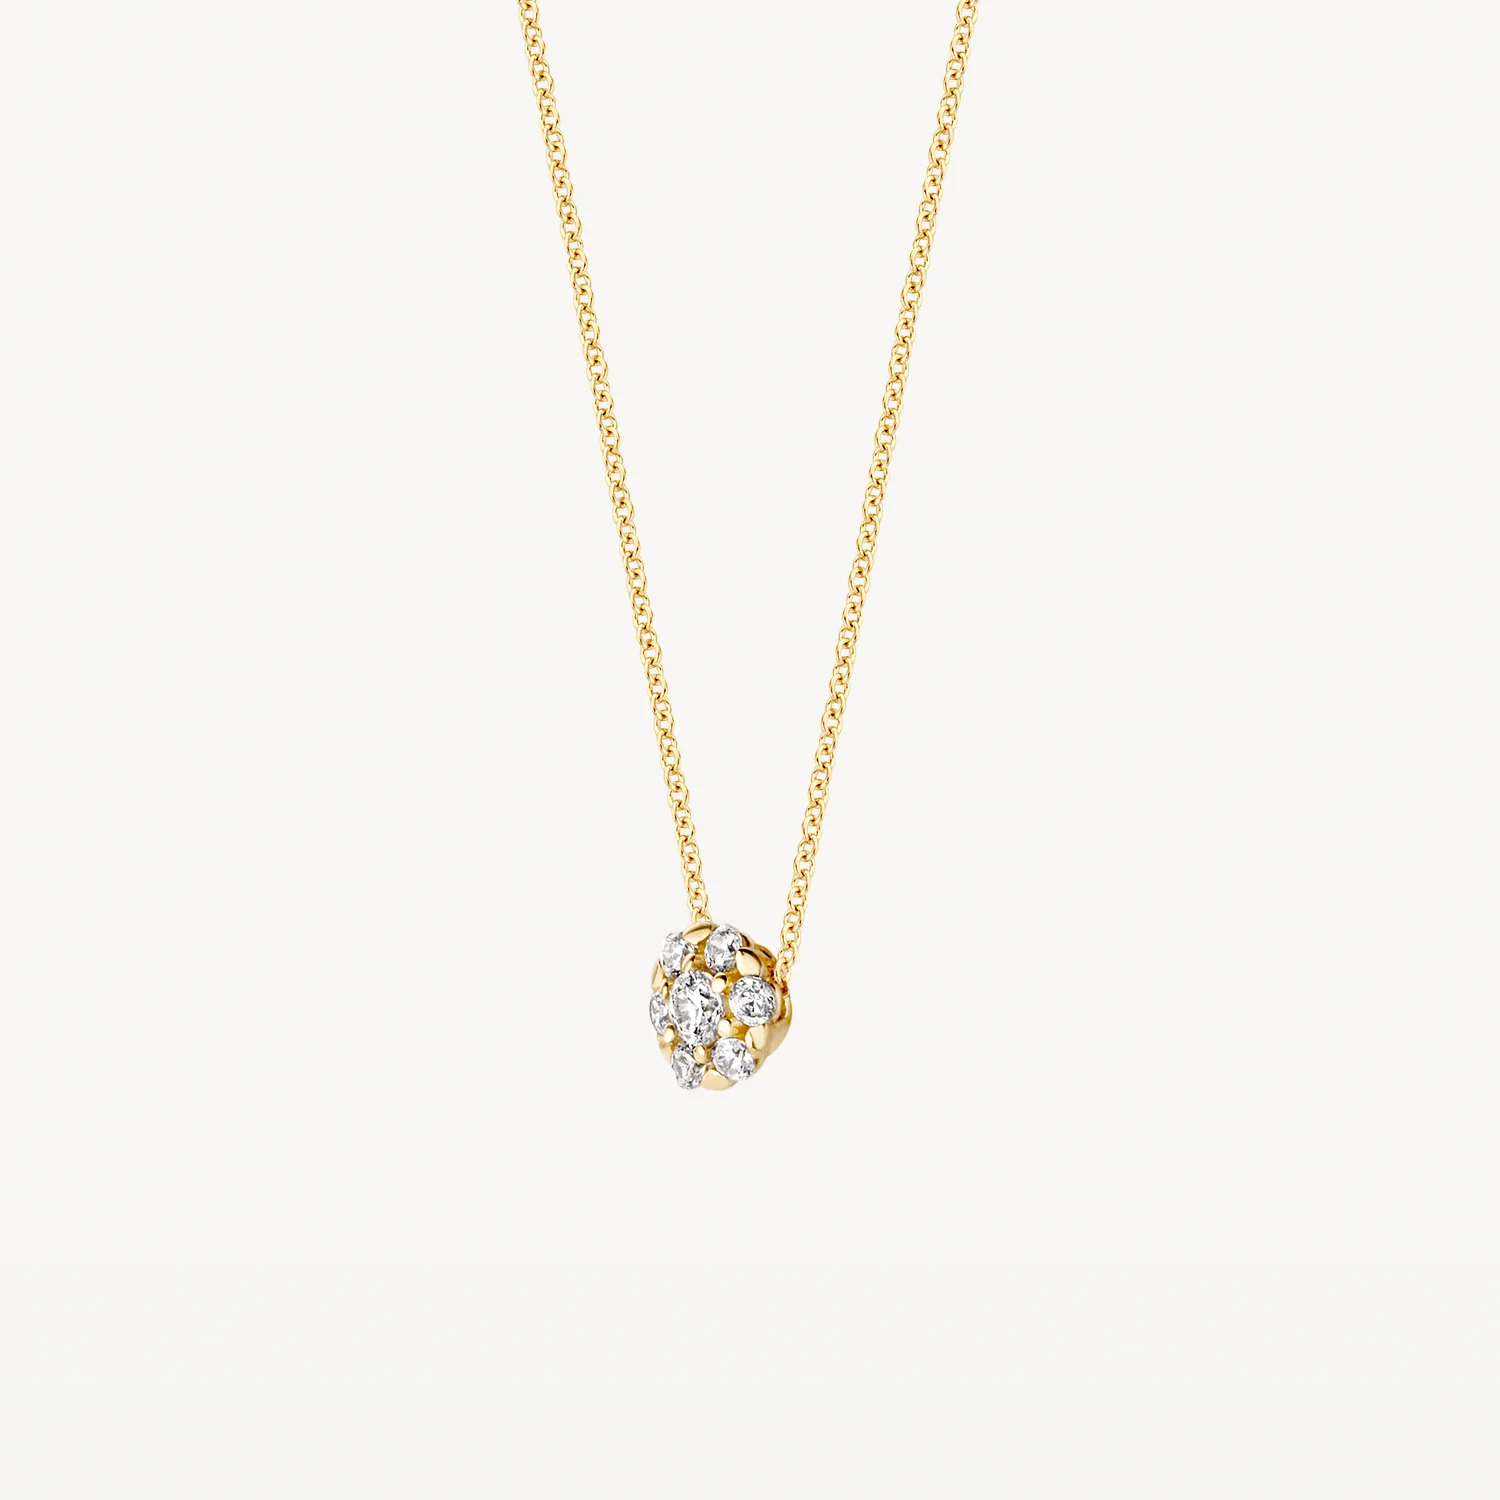 Blush Yellow Gold Necklace with CZ Cluster Pendant